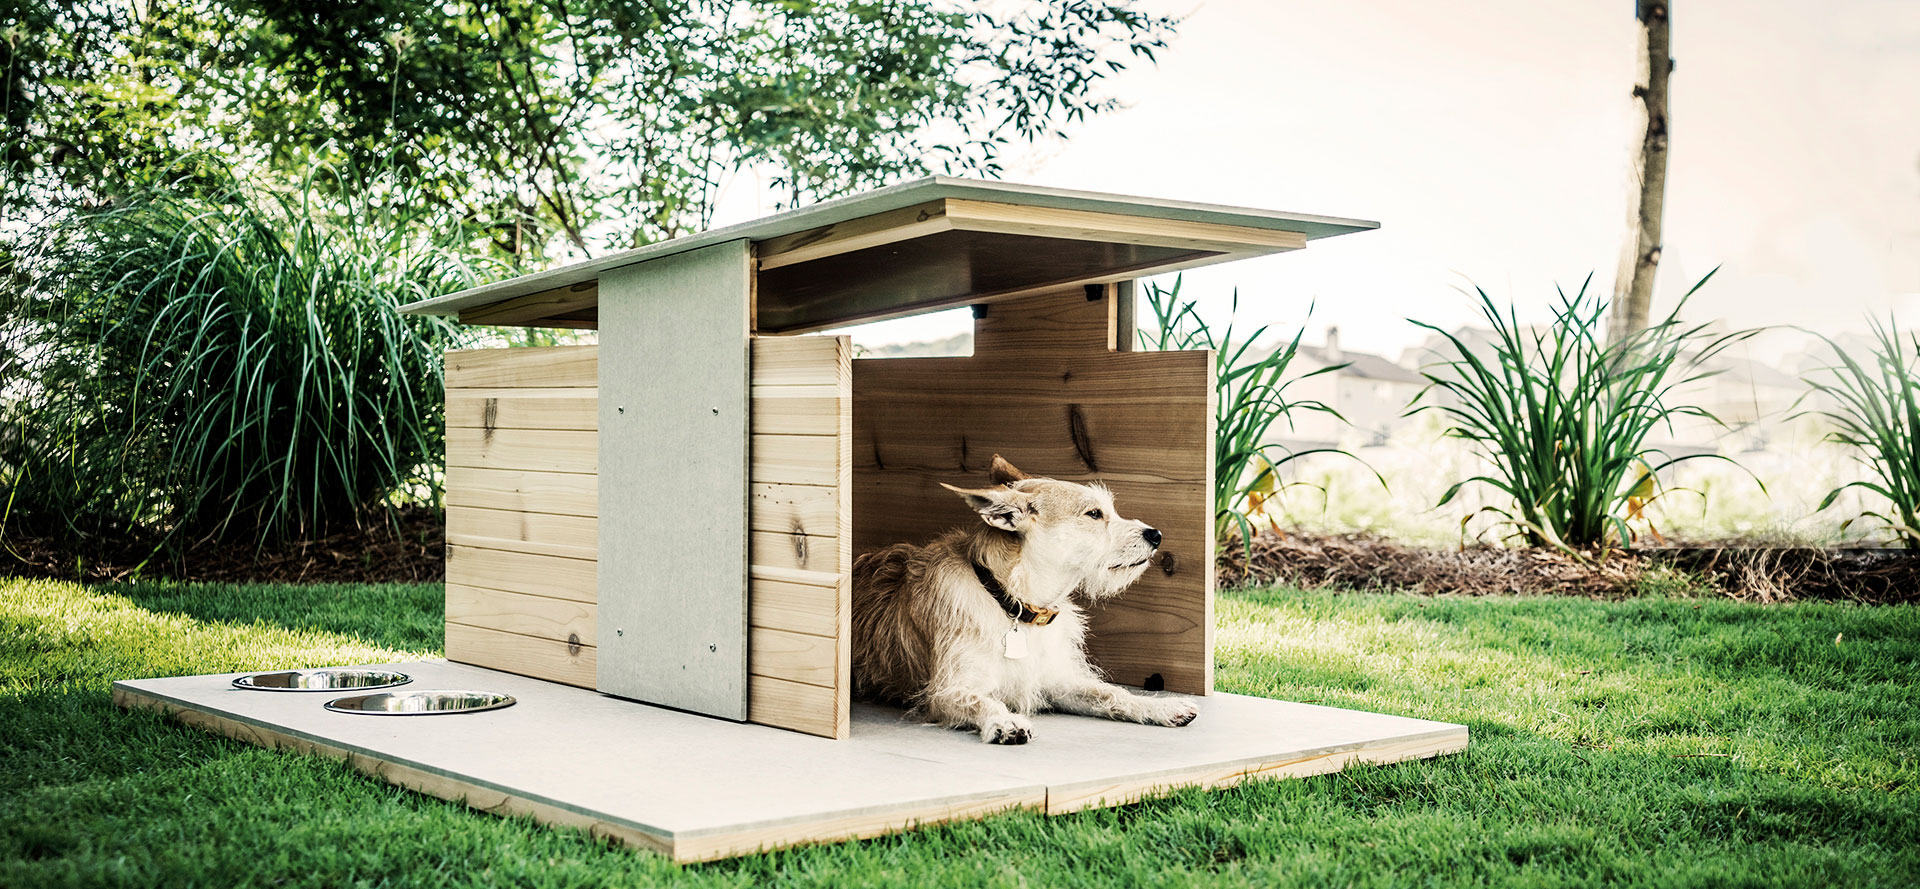 Wooden Dog House.